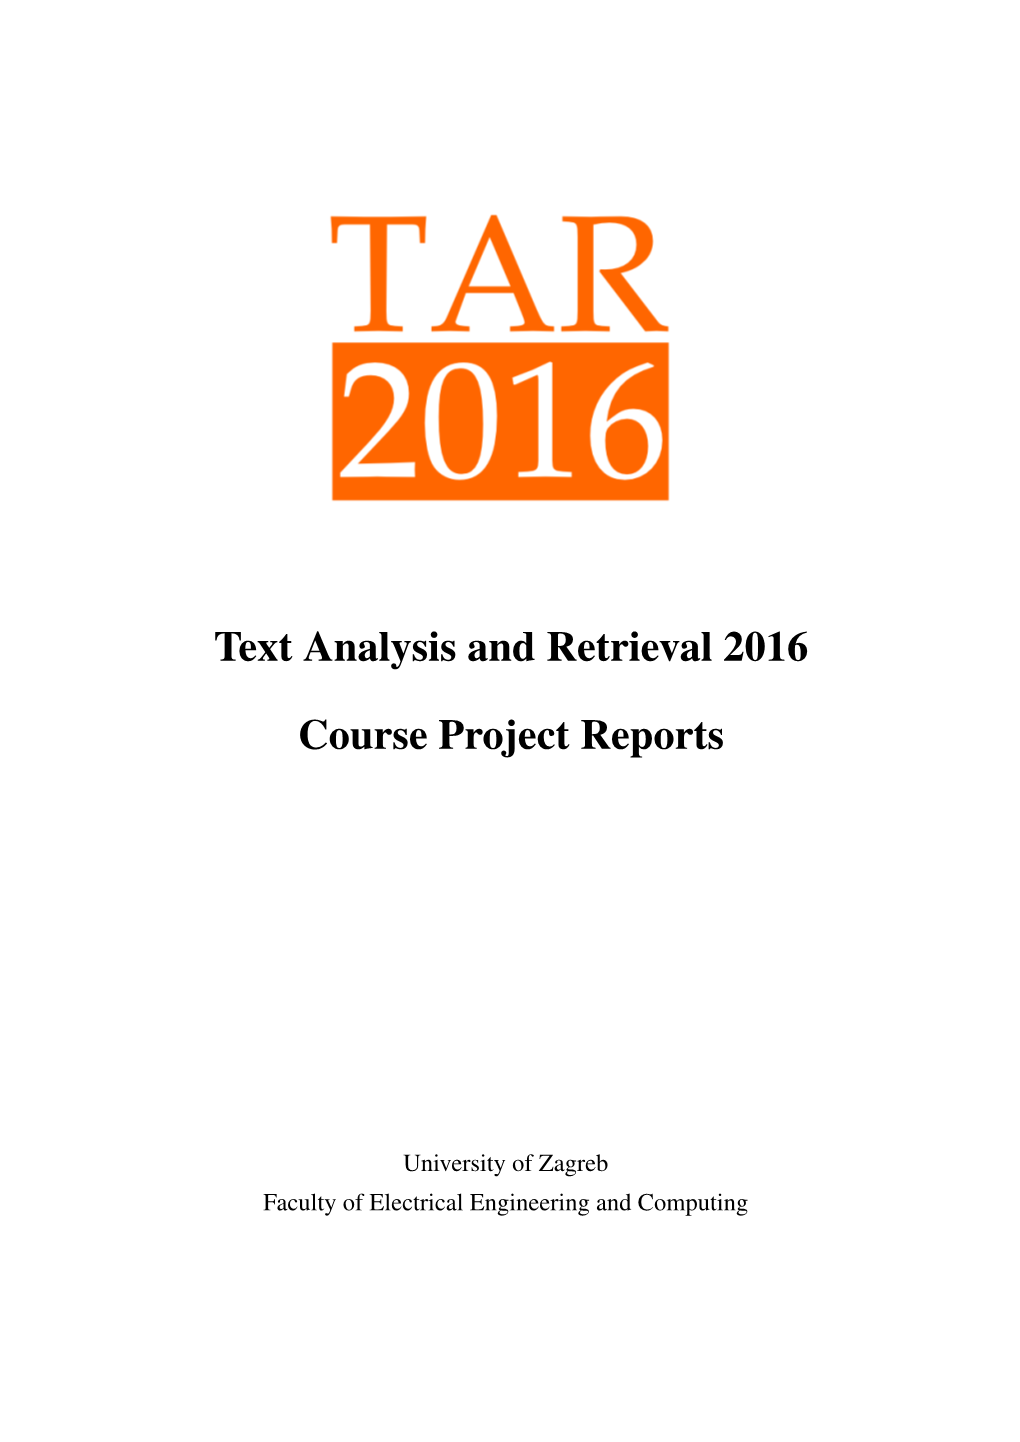 Text Analysis and Retrieval 2016 Course Project Reports